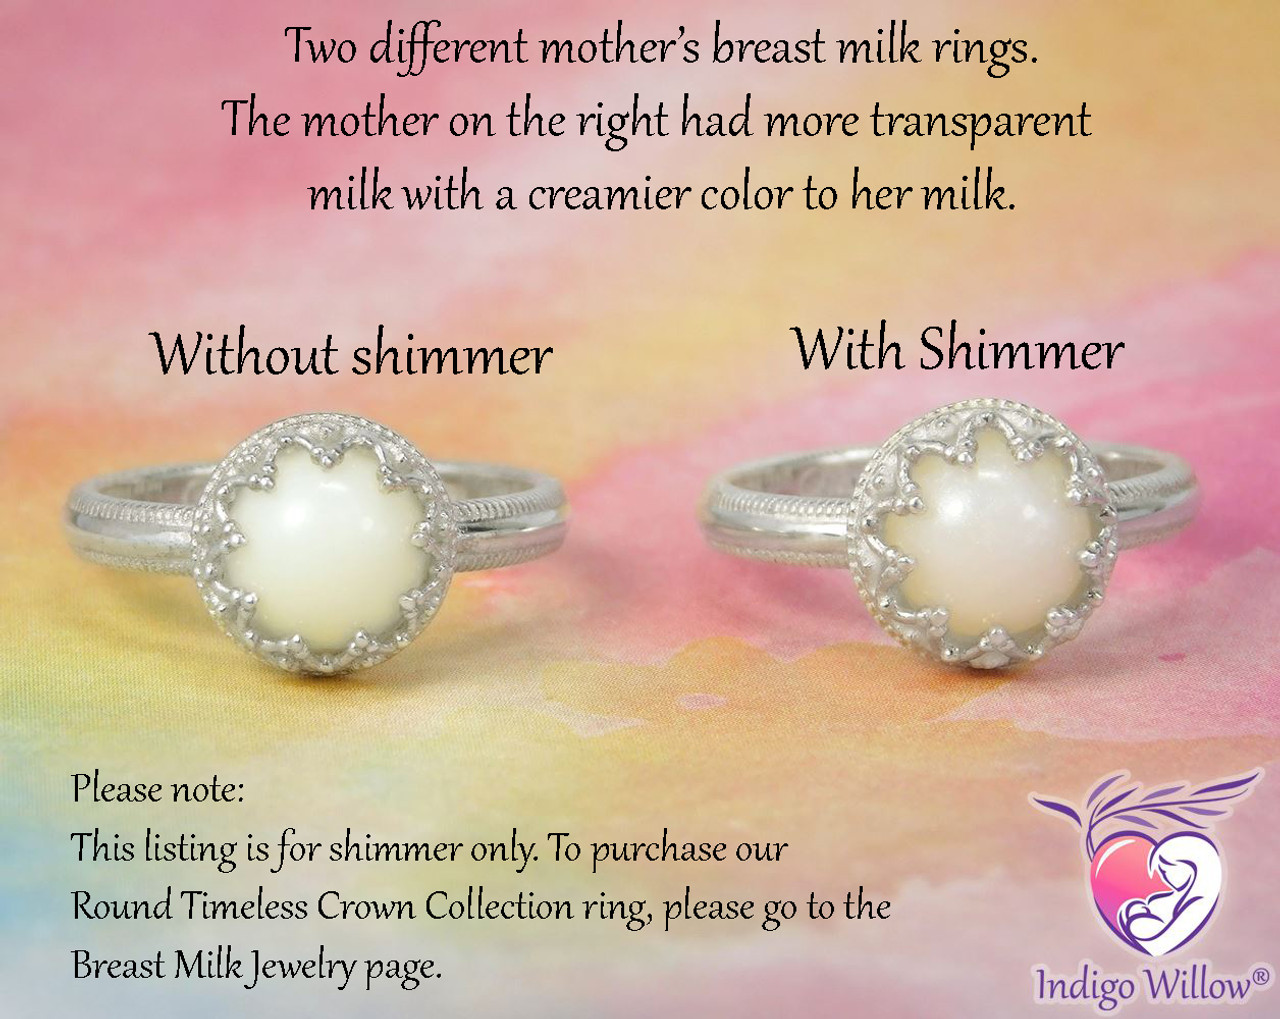 All-natural White Shimmer - Indigo Willow® Breast Milk Jewelry